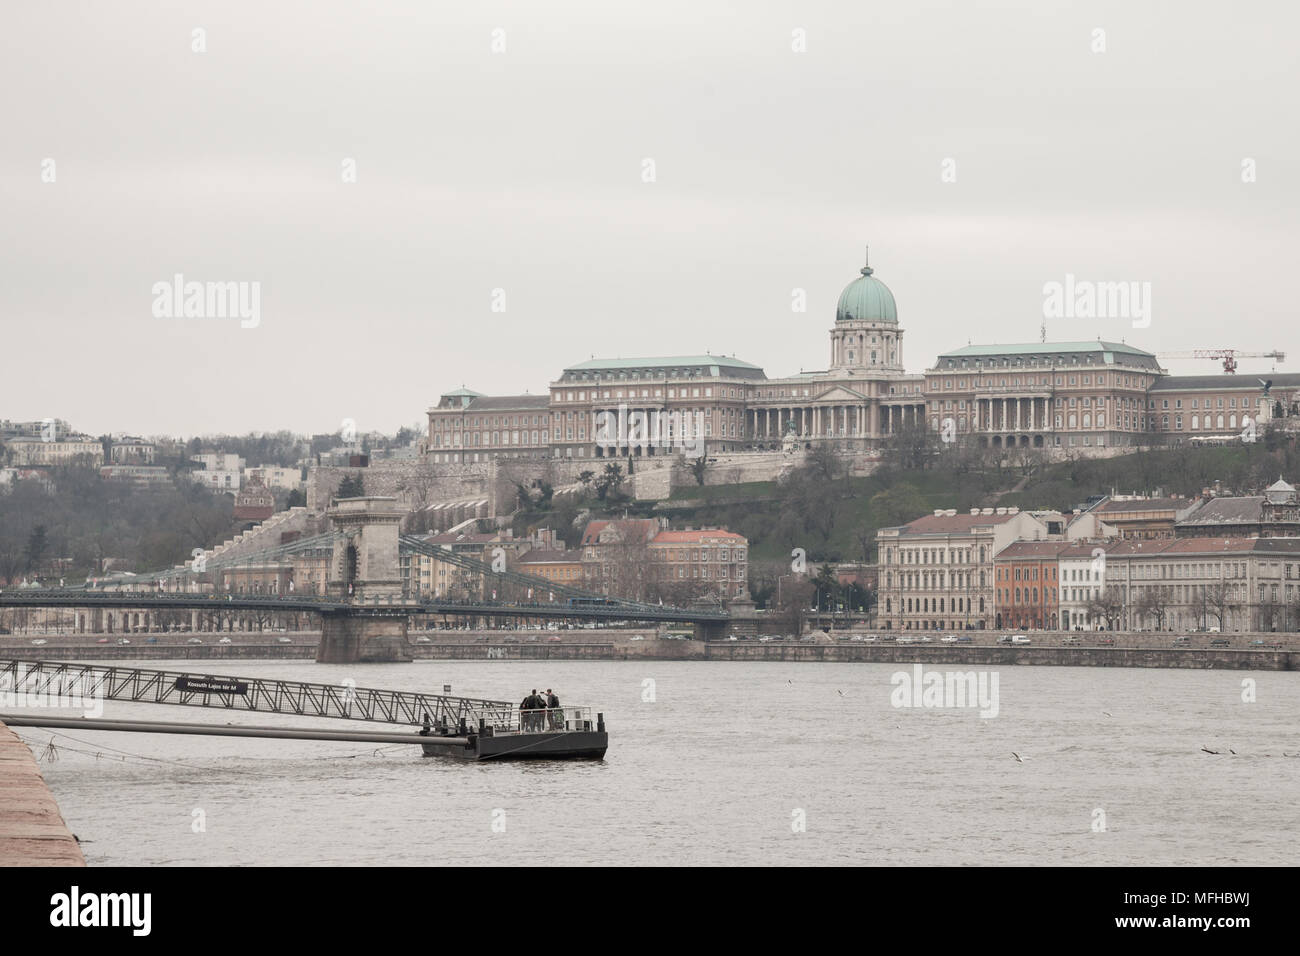 BUDAPEST, HUNGARY - APRIL 7, 2018: Buda Castle seen from Pest with the Danube in front.  The cast is the historical palace complex of the Hungarian ki Stock Photo